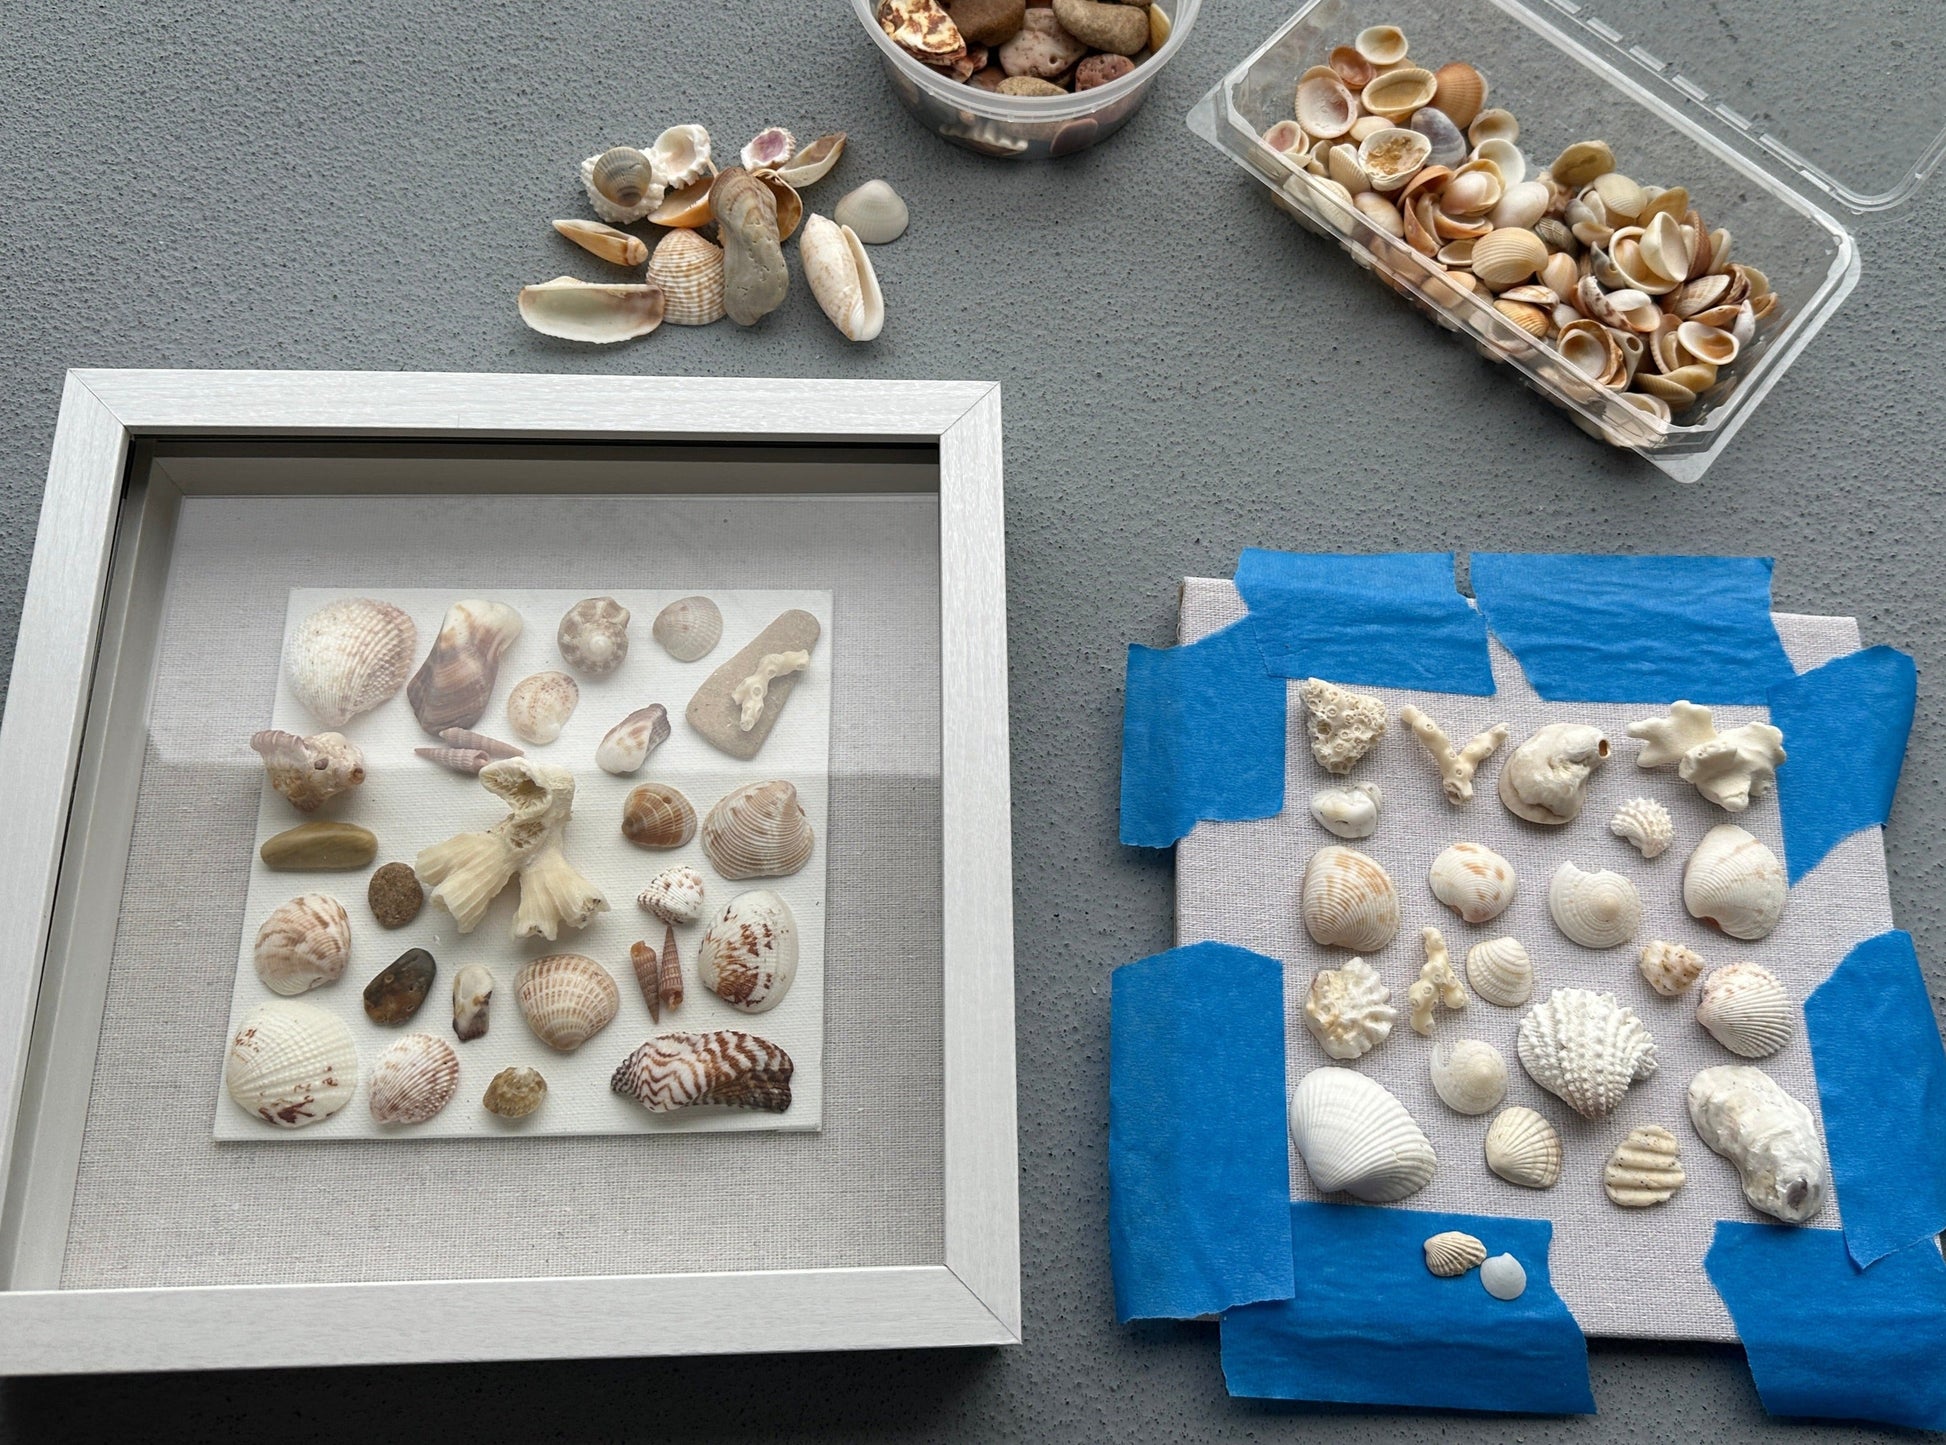 the making of seashell art by jacqueline bergeron - jacqueline mb designs